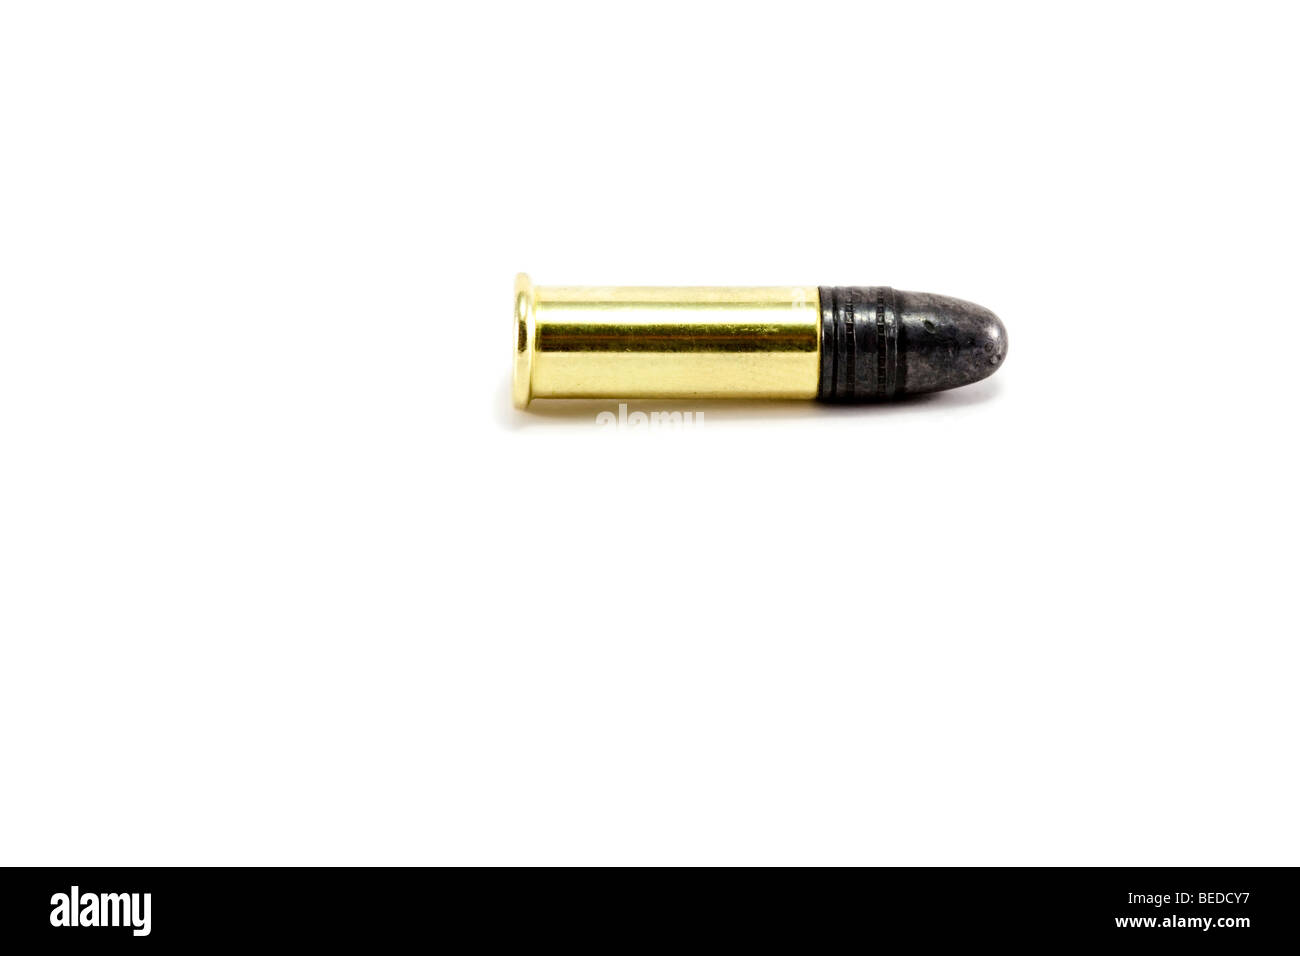 A small .22 bullet isolated on white Stock Photo